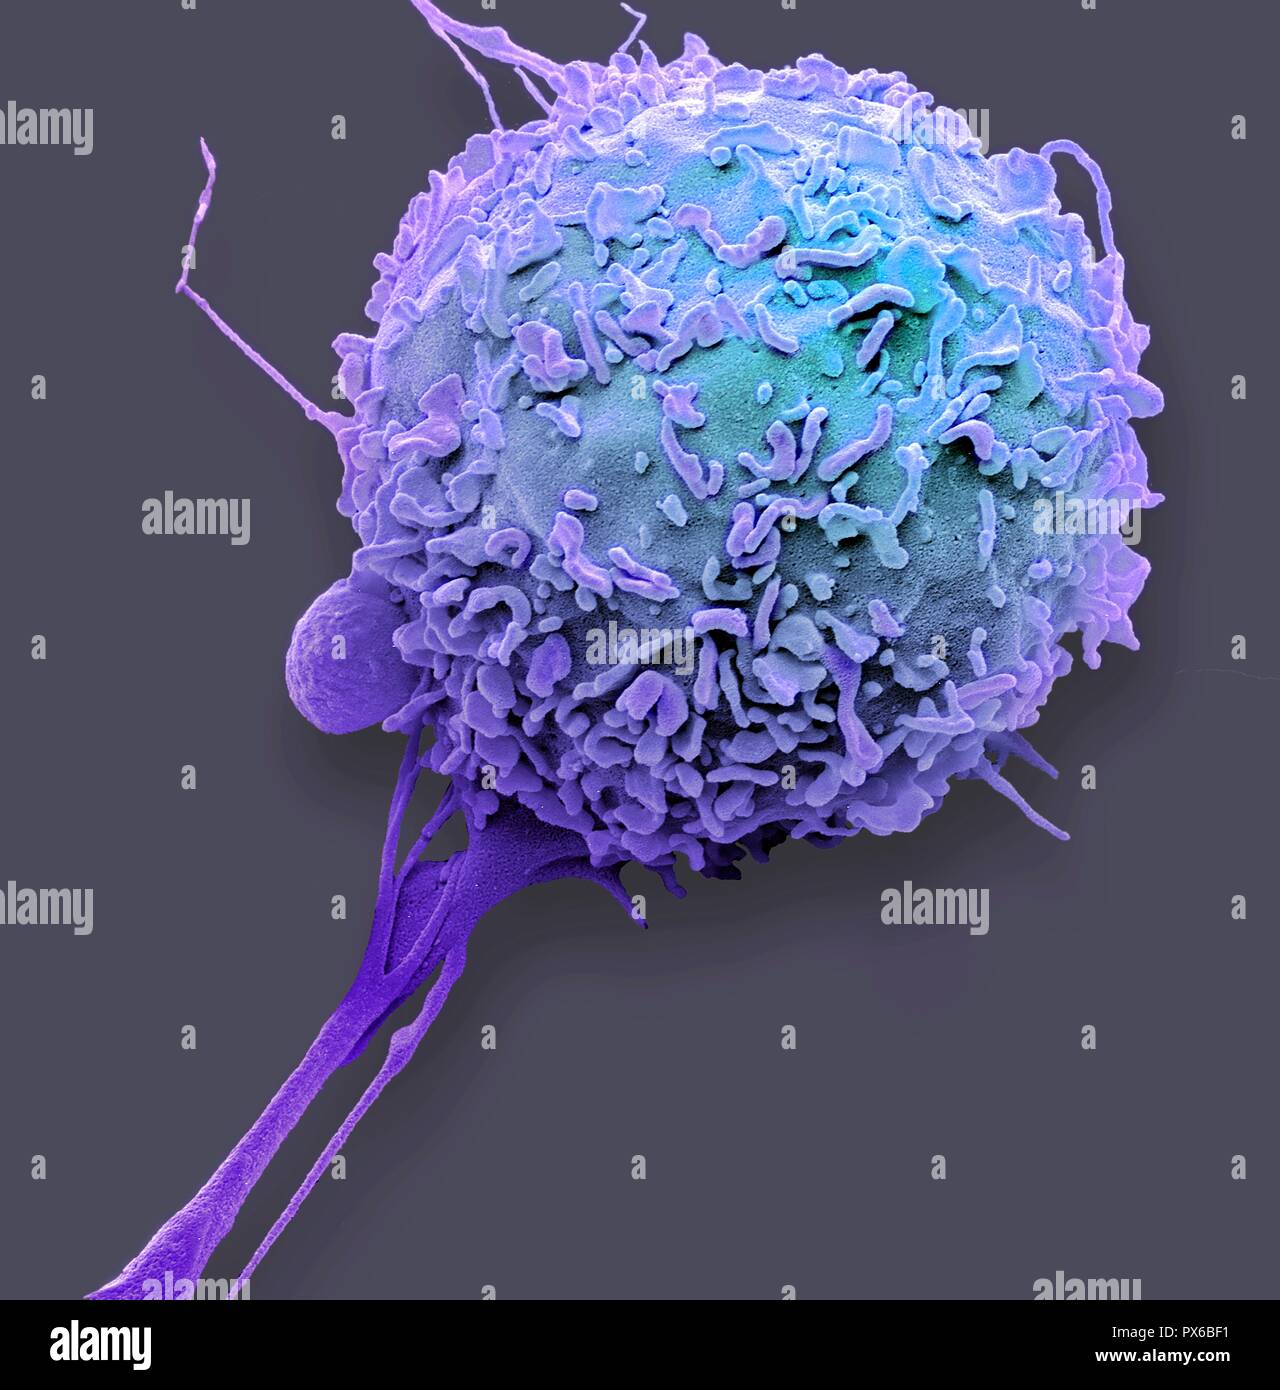 Macrophage. Coloured scanning electron micrograph (SEM) of a macrophage  white blood cell. Macrophages are cells of the body's immune system. They  are found in the tissues rather than in the circulating blood.